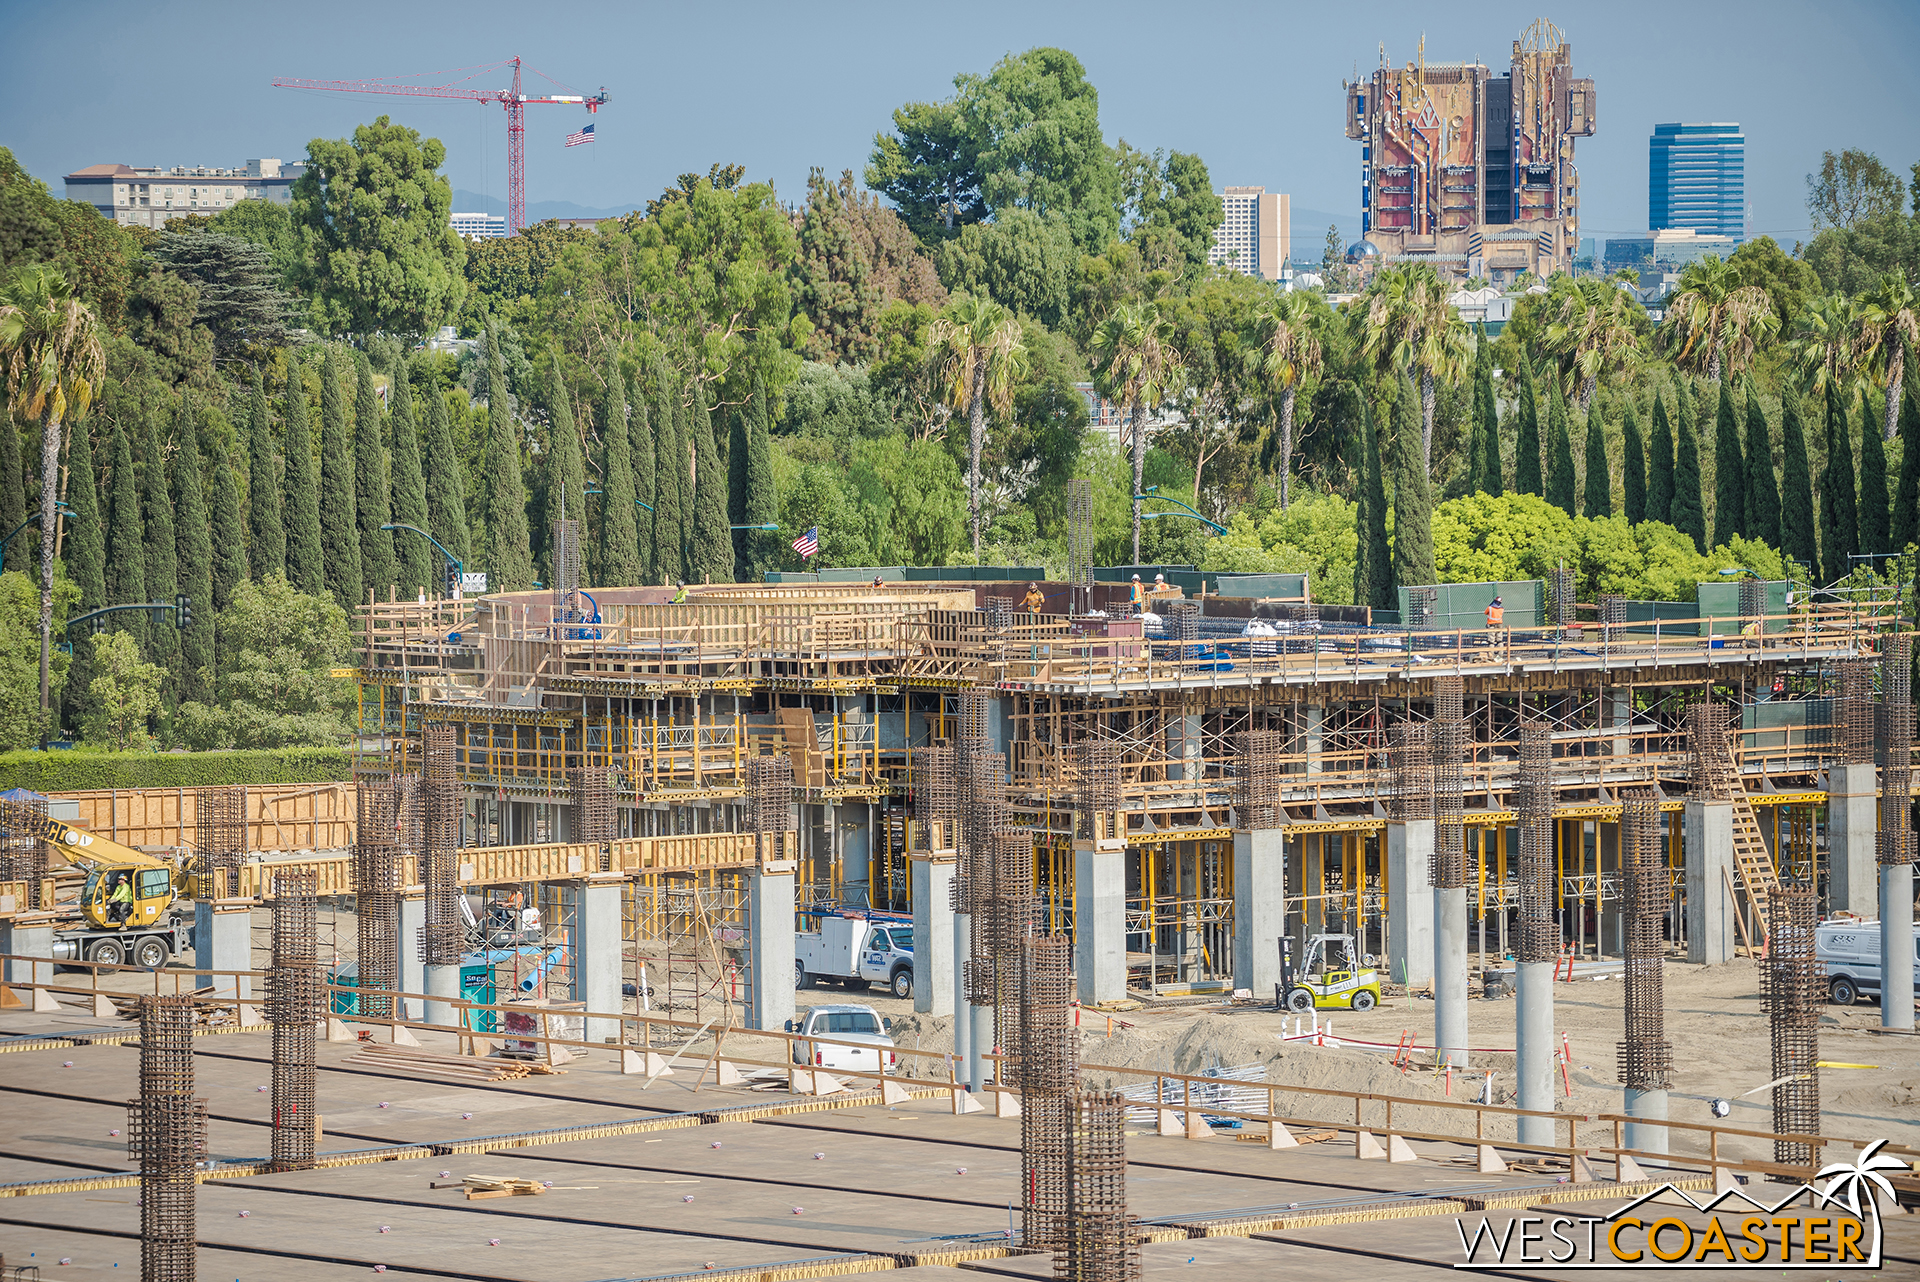  On Friday, they were working on the second floor.  By Sunday, they were lifting the rebar cage for the first column of the third level. 